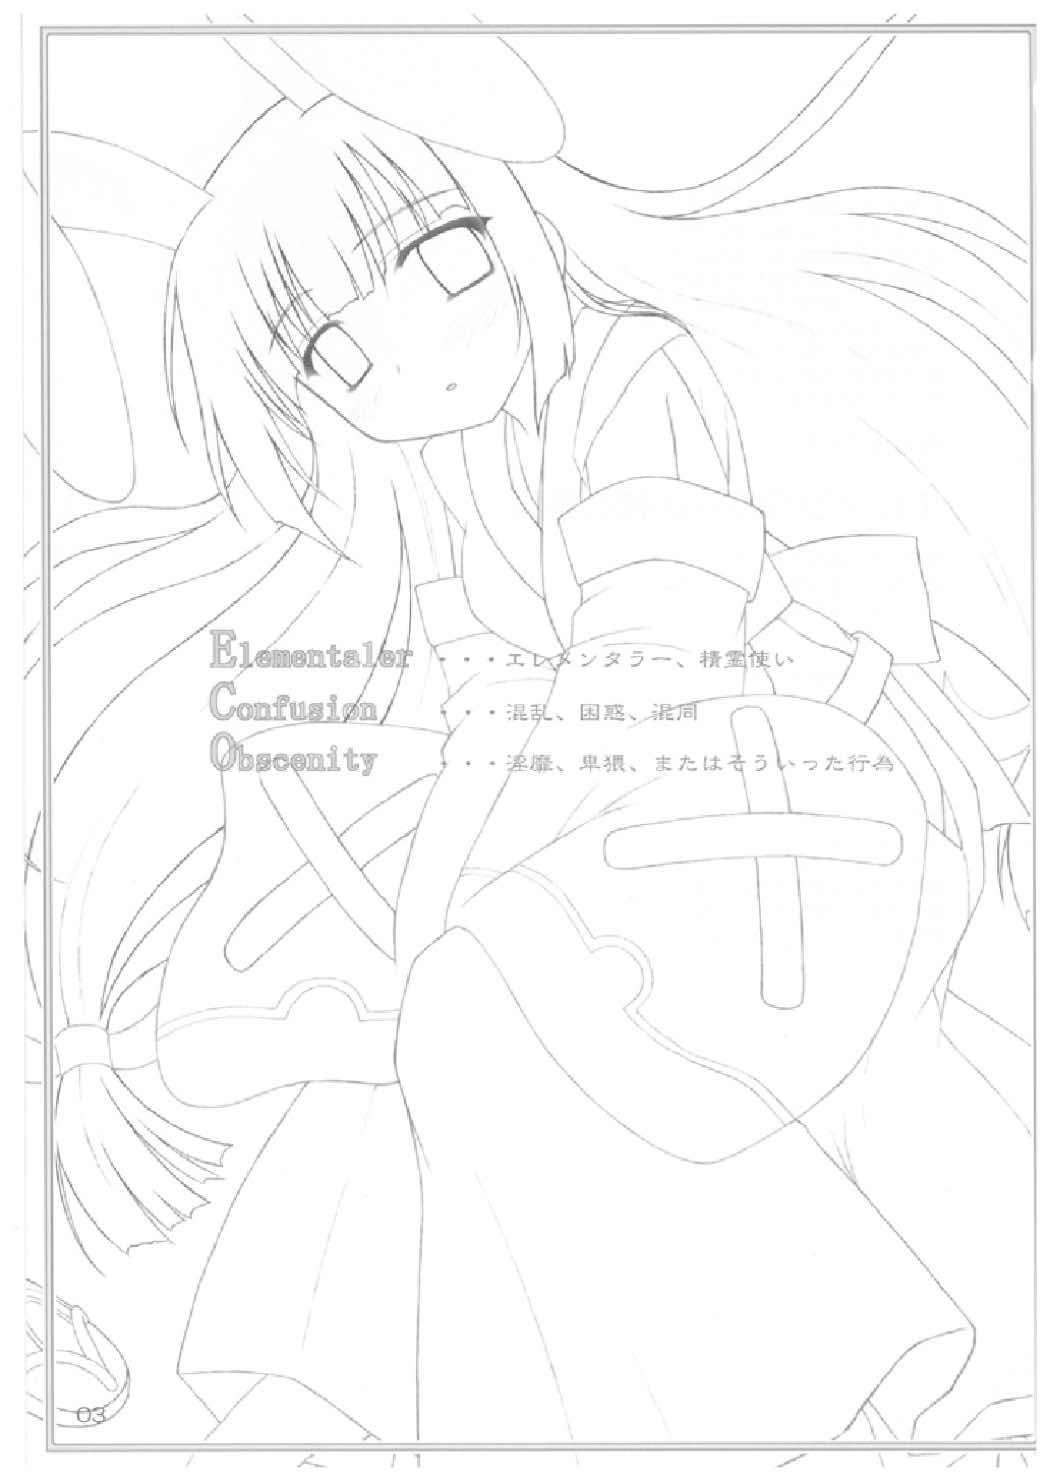 Soloboy Elementaler Confusion Obscenity - Emil chronicle online White Chick - Page 3